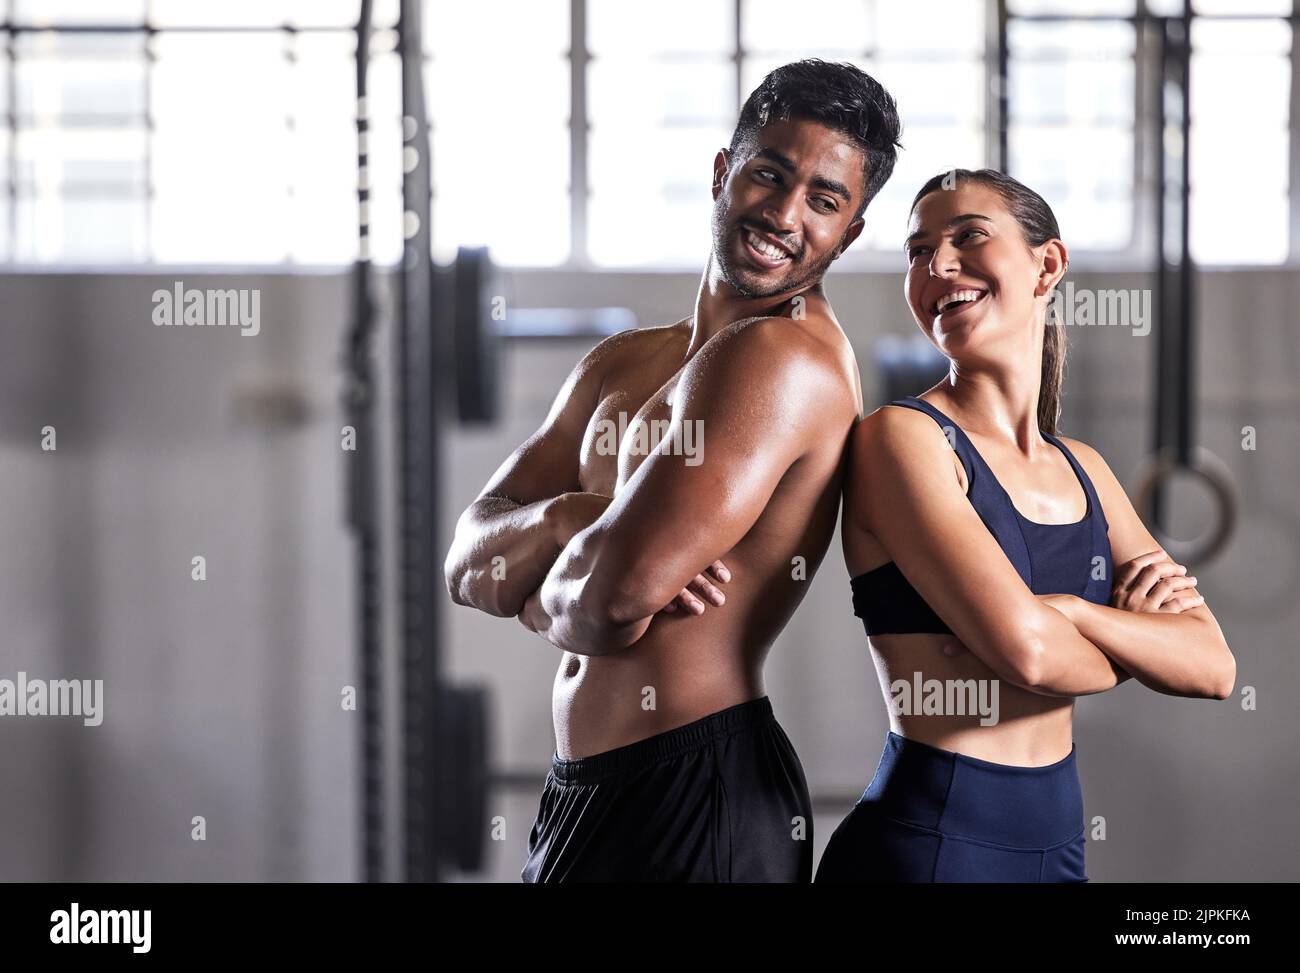 Team, gym and fitness couple doing exercise workout and living a healthy, wellness and athletic lifestyle together. Happy, energy and strong friends Stock Photo